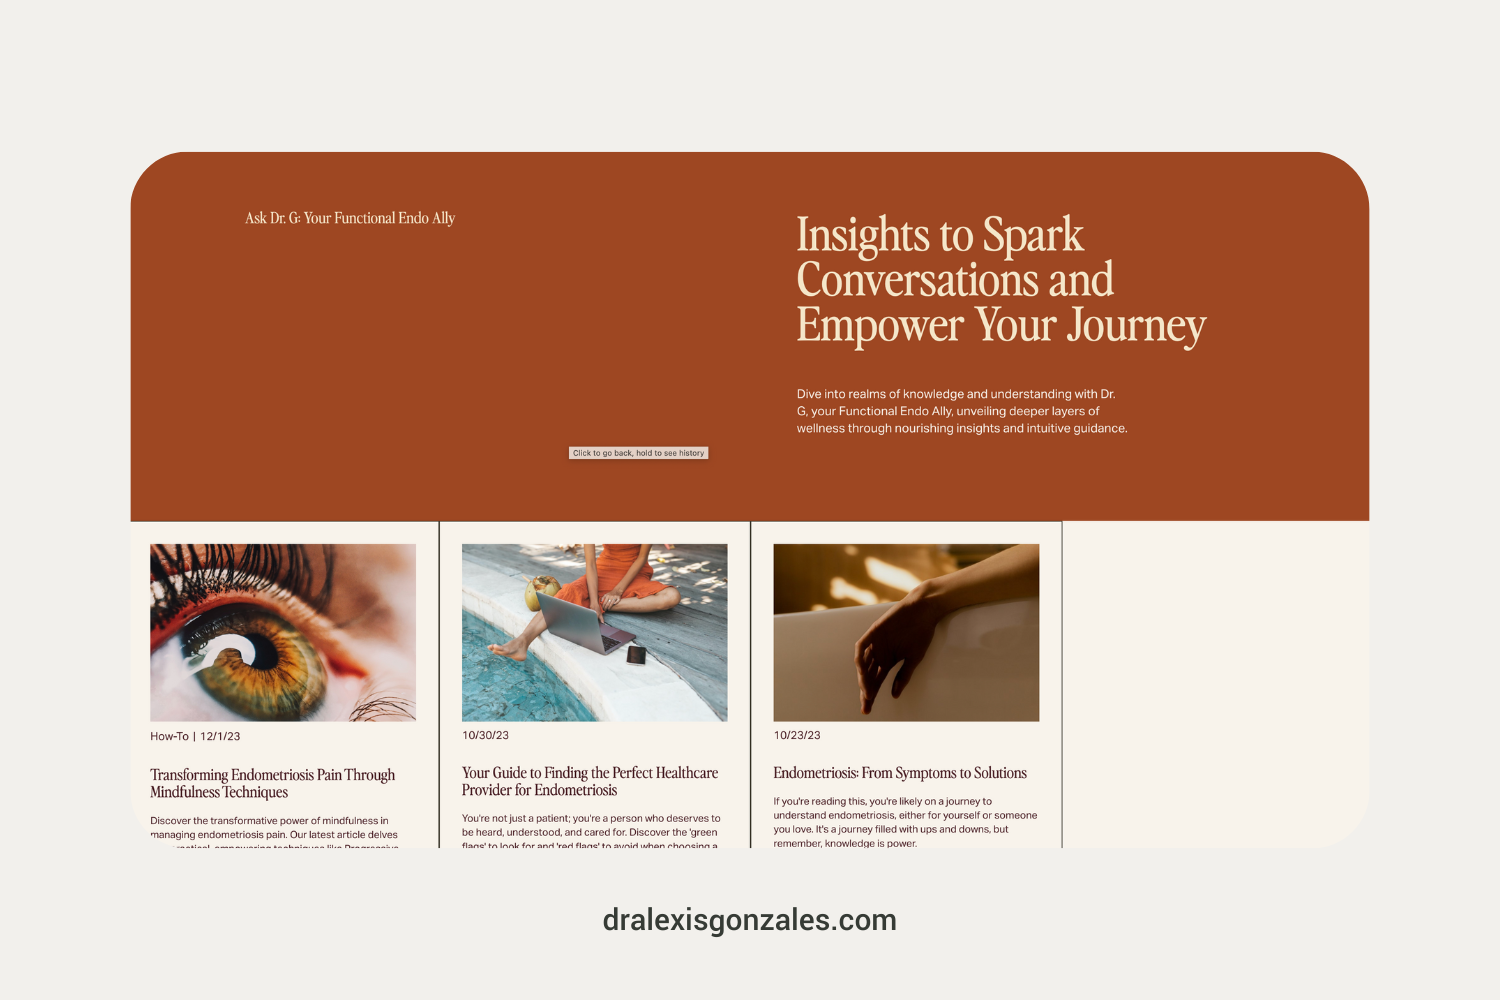 State of Sage_Interbeing Website Templates in use43.png